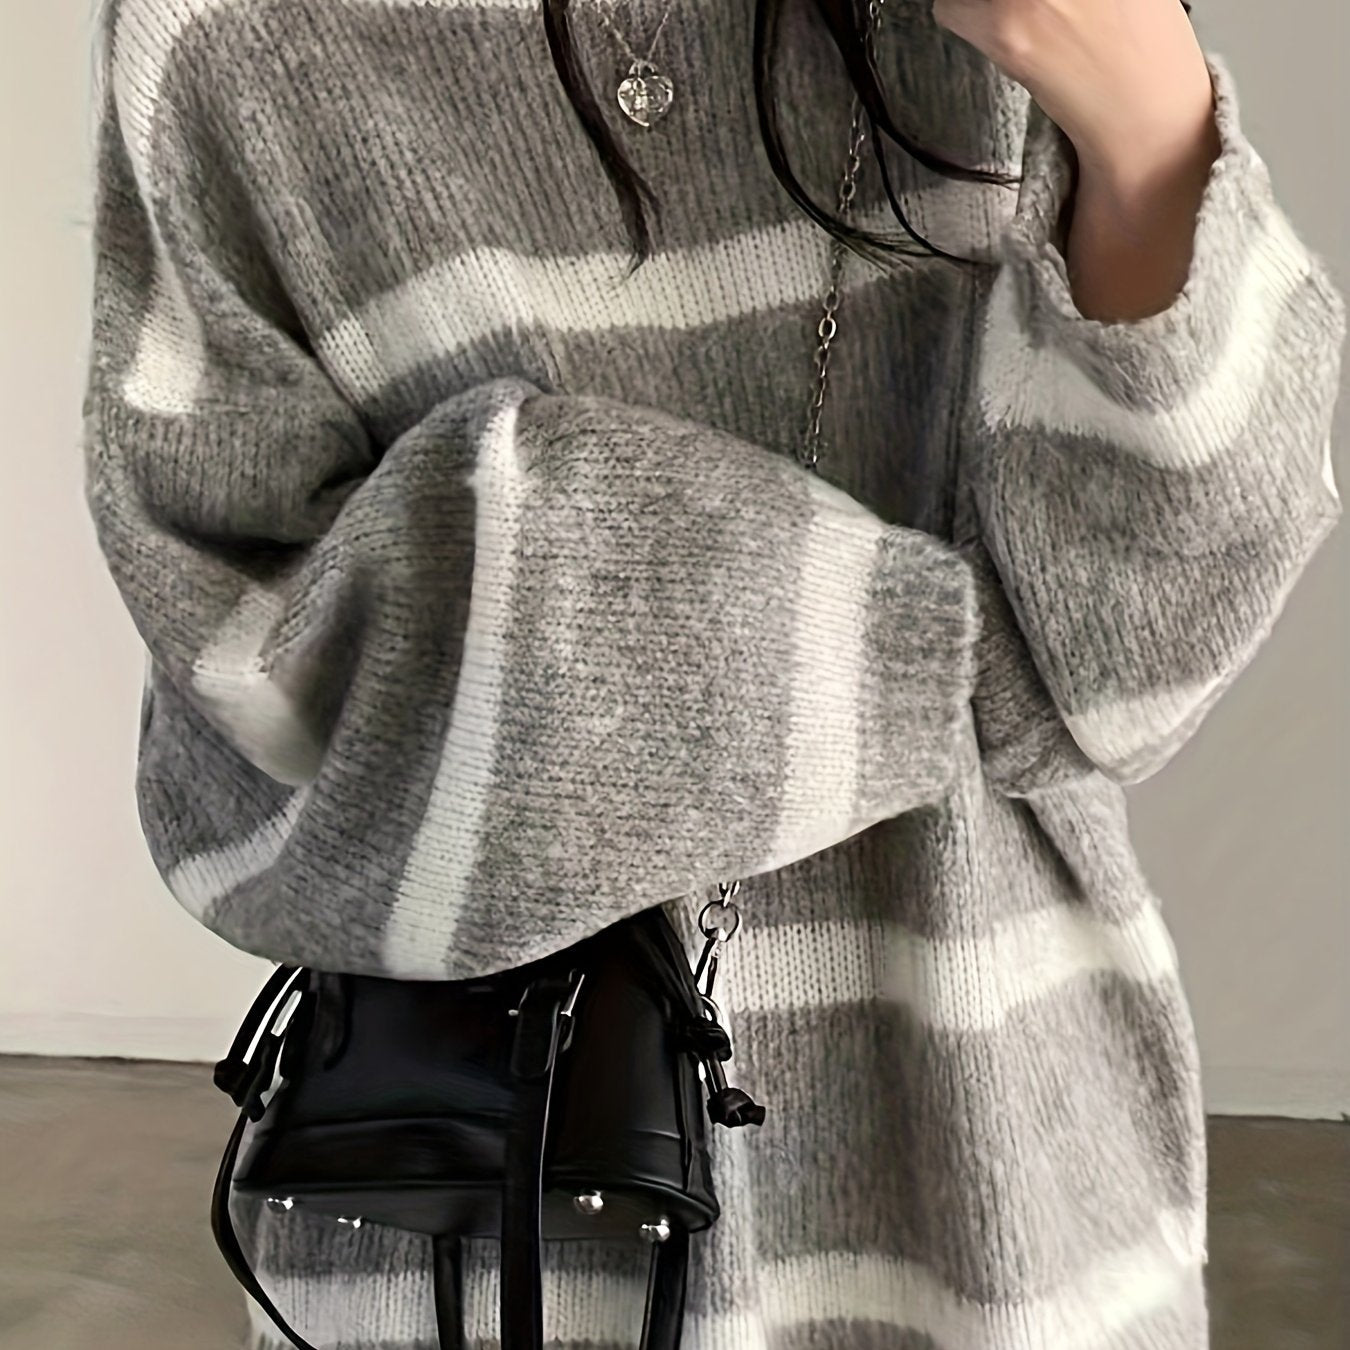 Antmvs Striped Crew Neck Pullover Sweater, Casual Long Sleeve Oversized Cozy Sweater, Women's Clothing